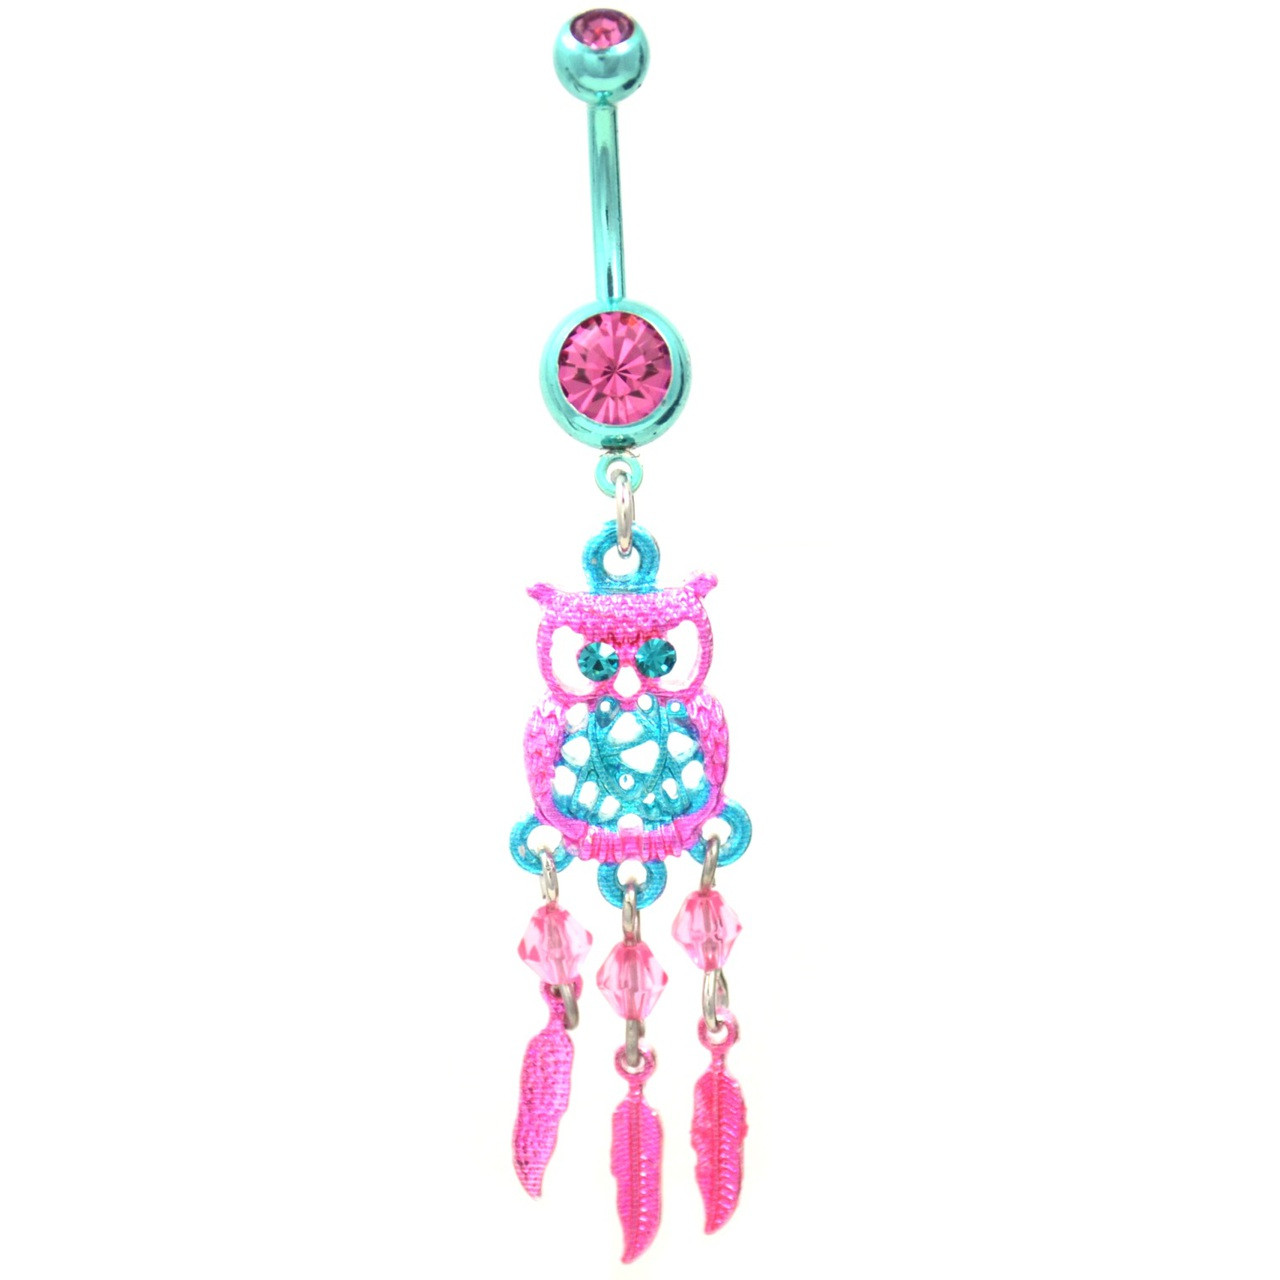 Guardian Owl Dreamcatcher 316L Surgical Steel Belly Button Ring 